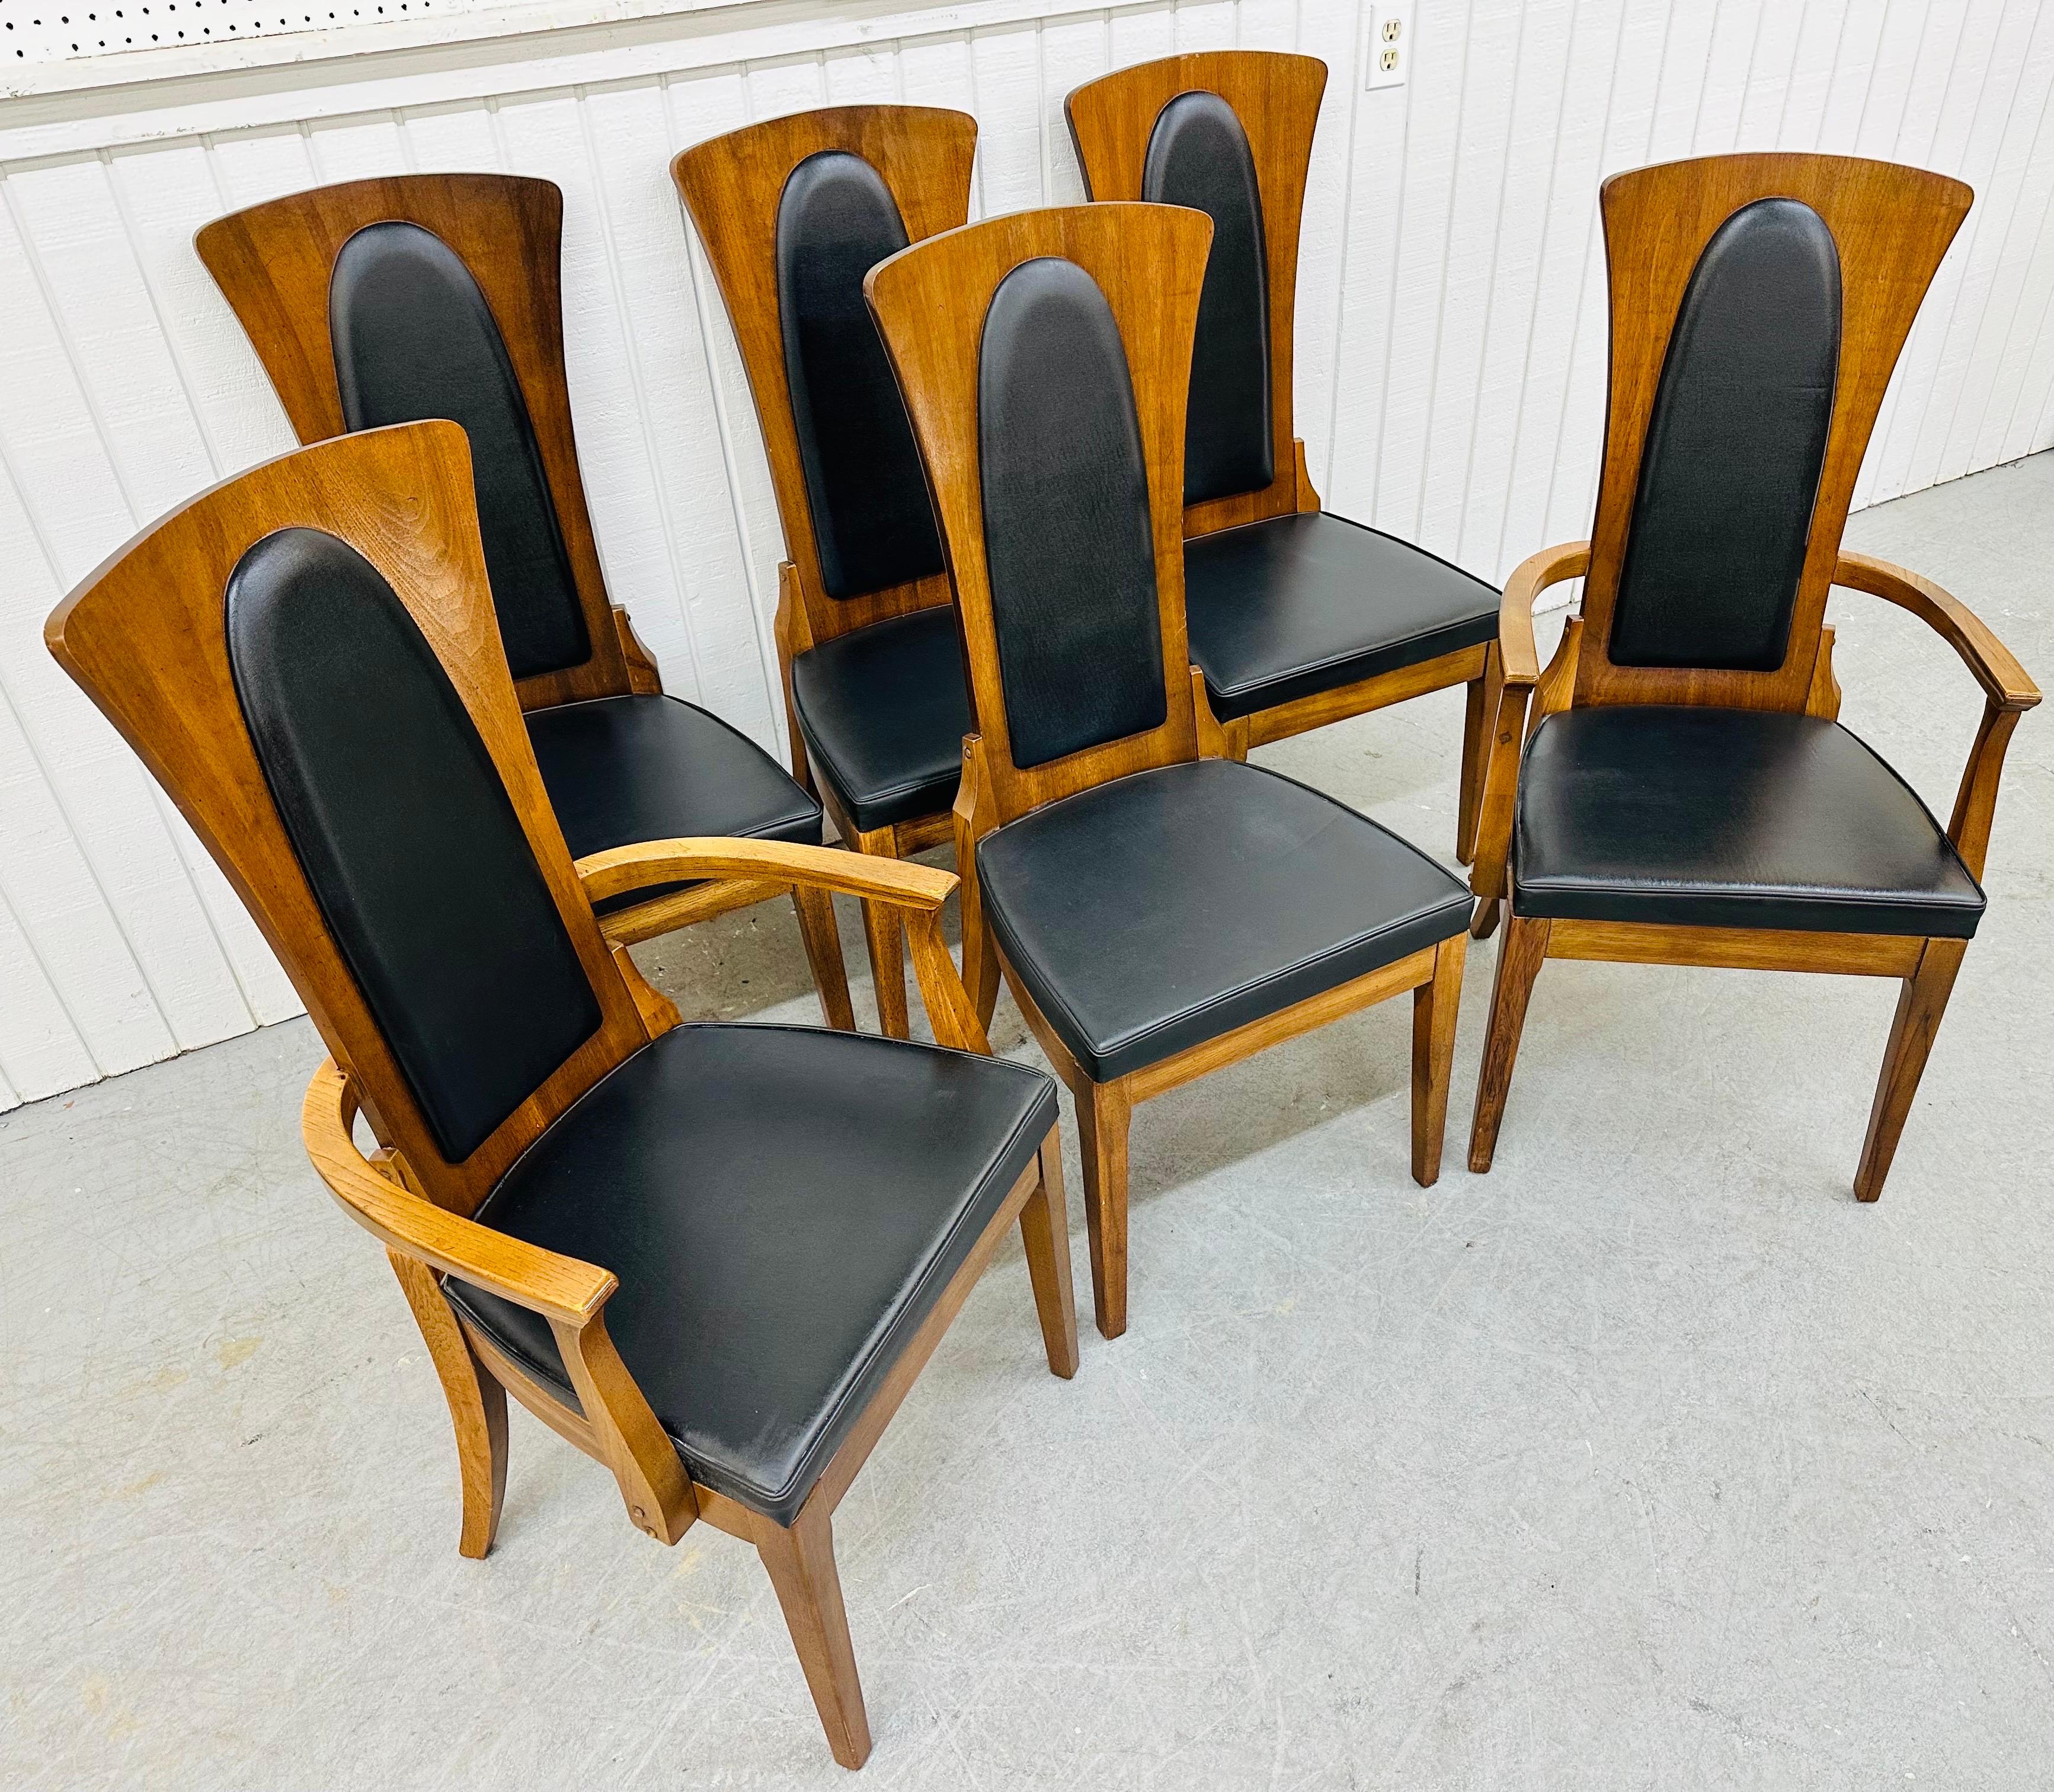 This listing is for a set of six Mid-Century Modern Walnut & Leather Dining Chairs. Featuring a high back design, two arm chairs, four straight chairs, original black leather upholstery, and a beautiful walnut finish. This is an exceptional